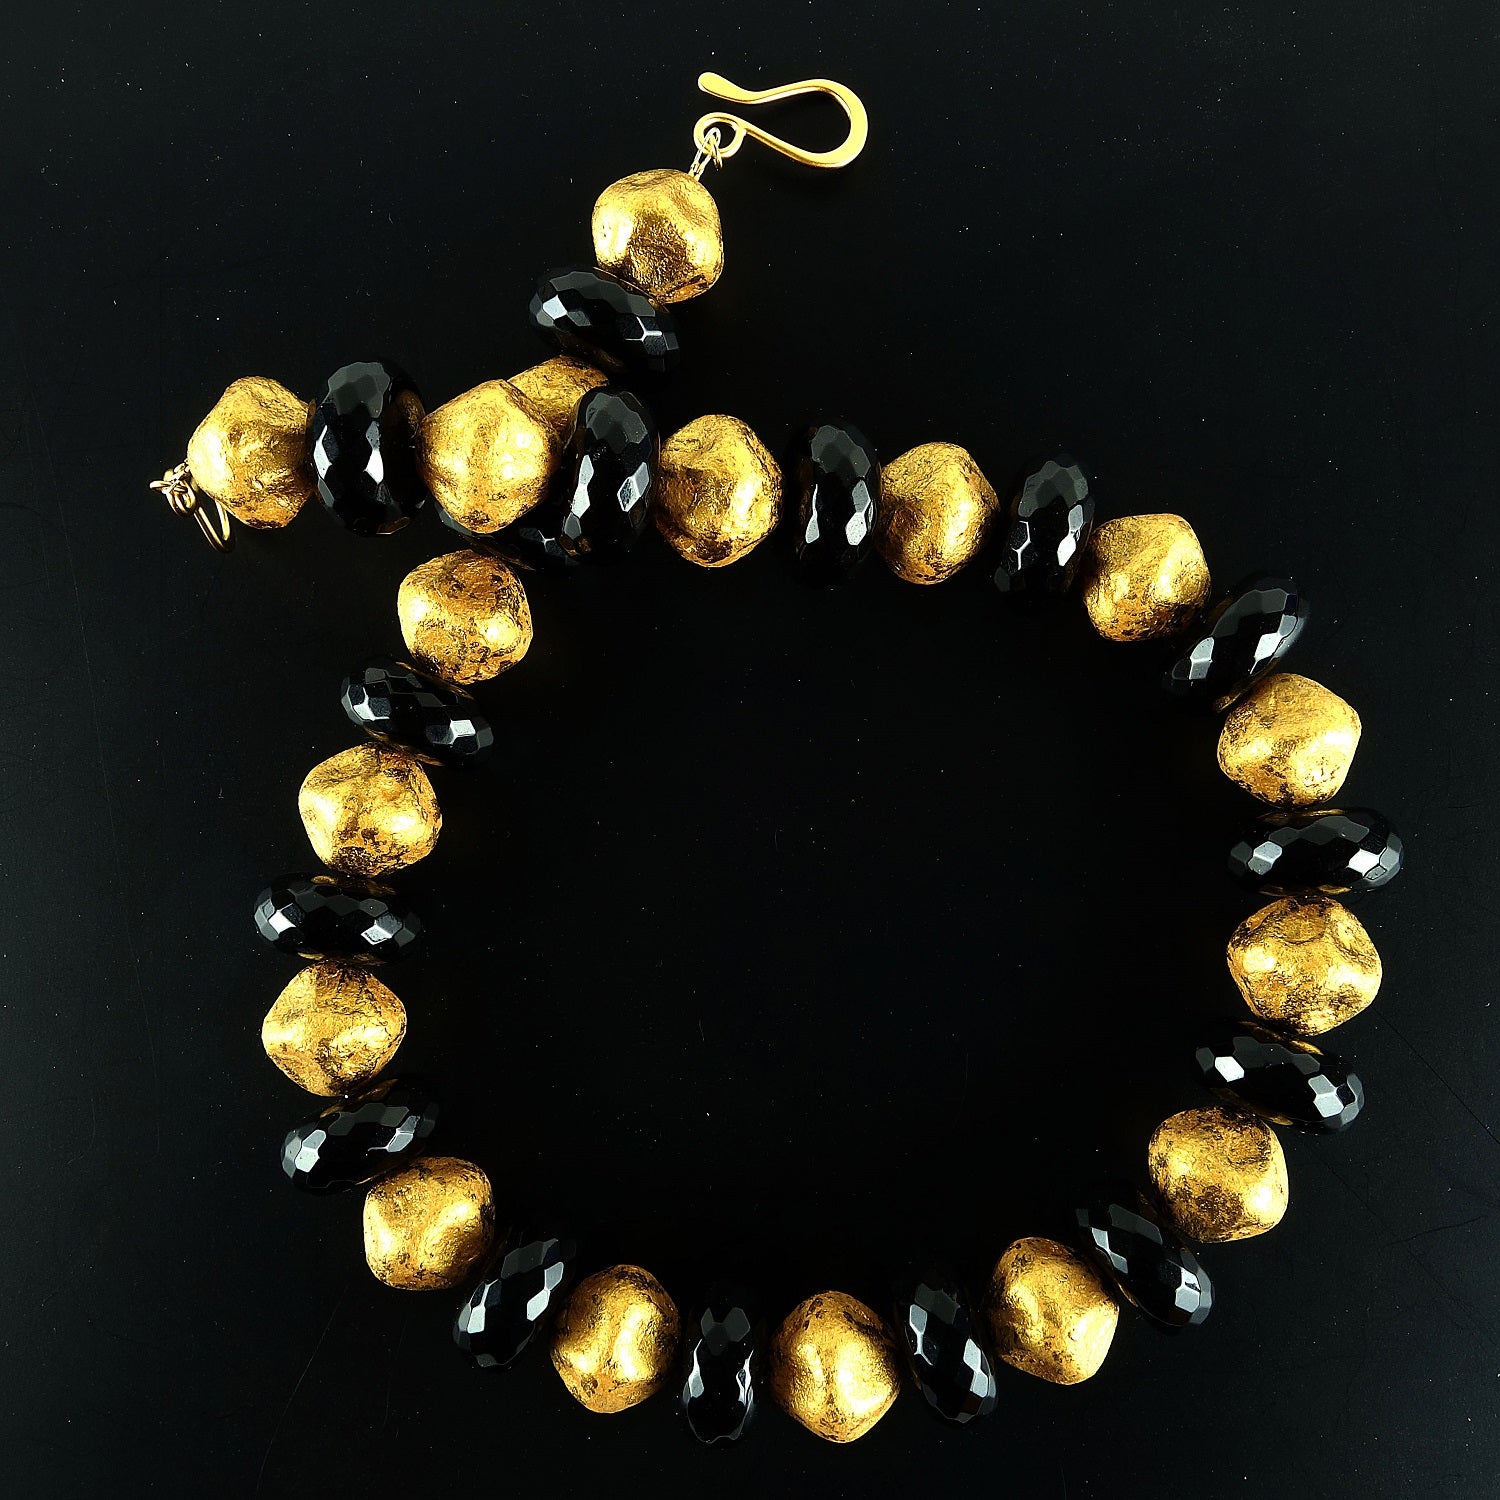 AJD 18 Inch Elegant Black Onyx and Antique Gold Bead Necklace  Great Gift!!